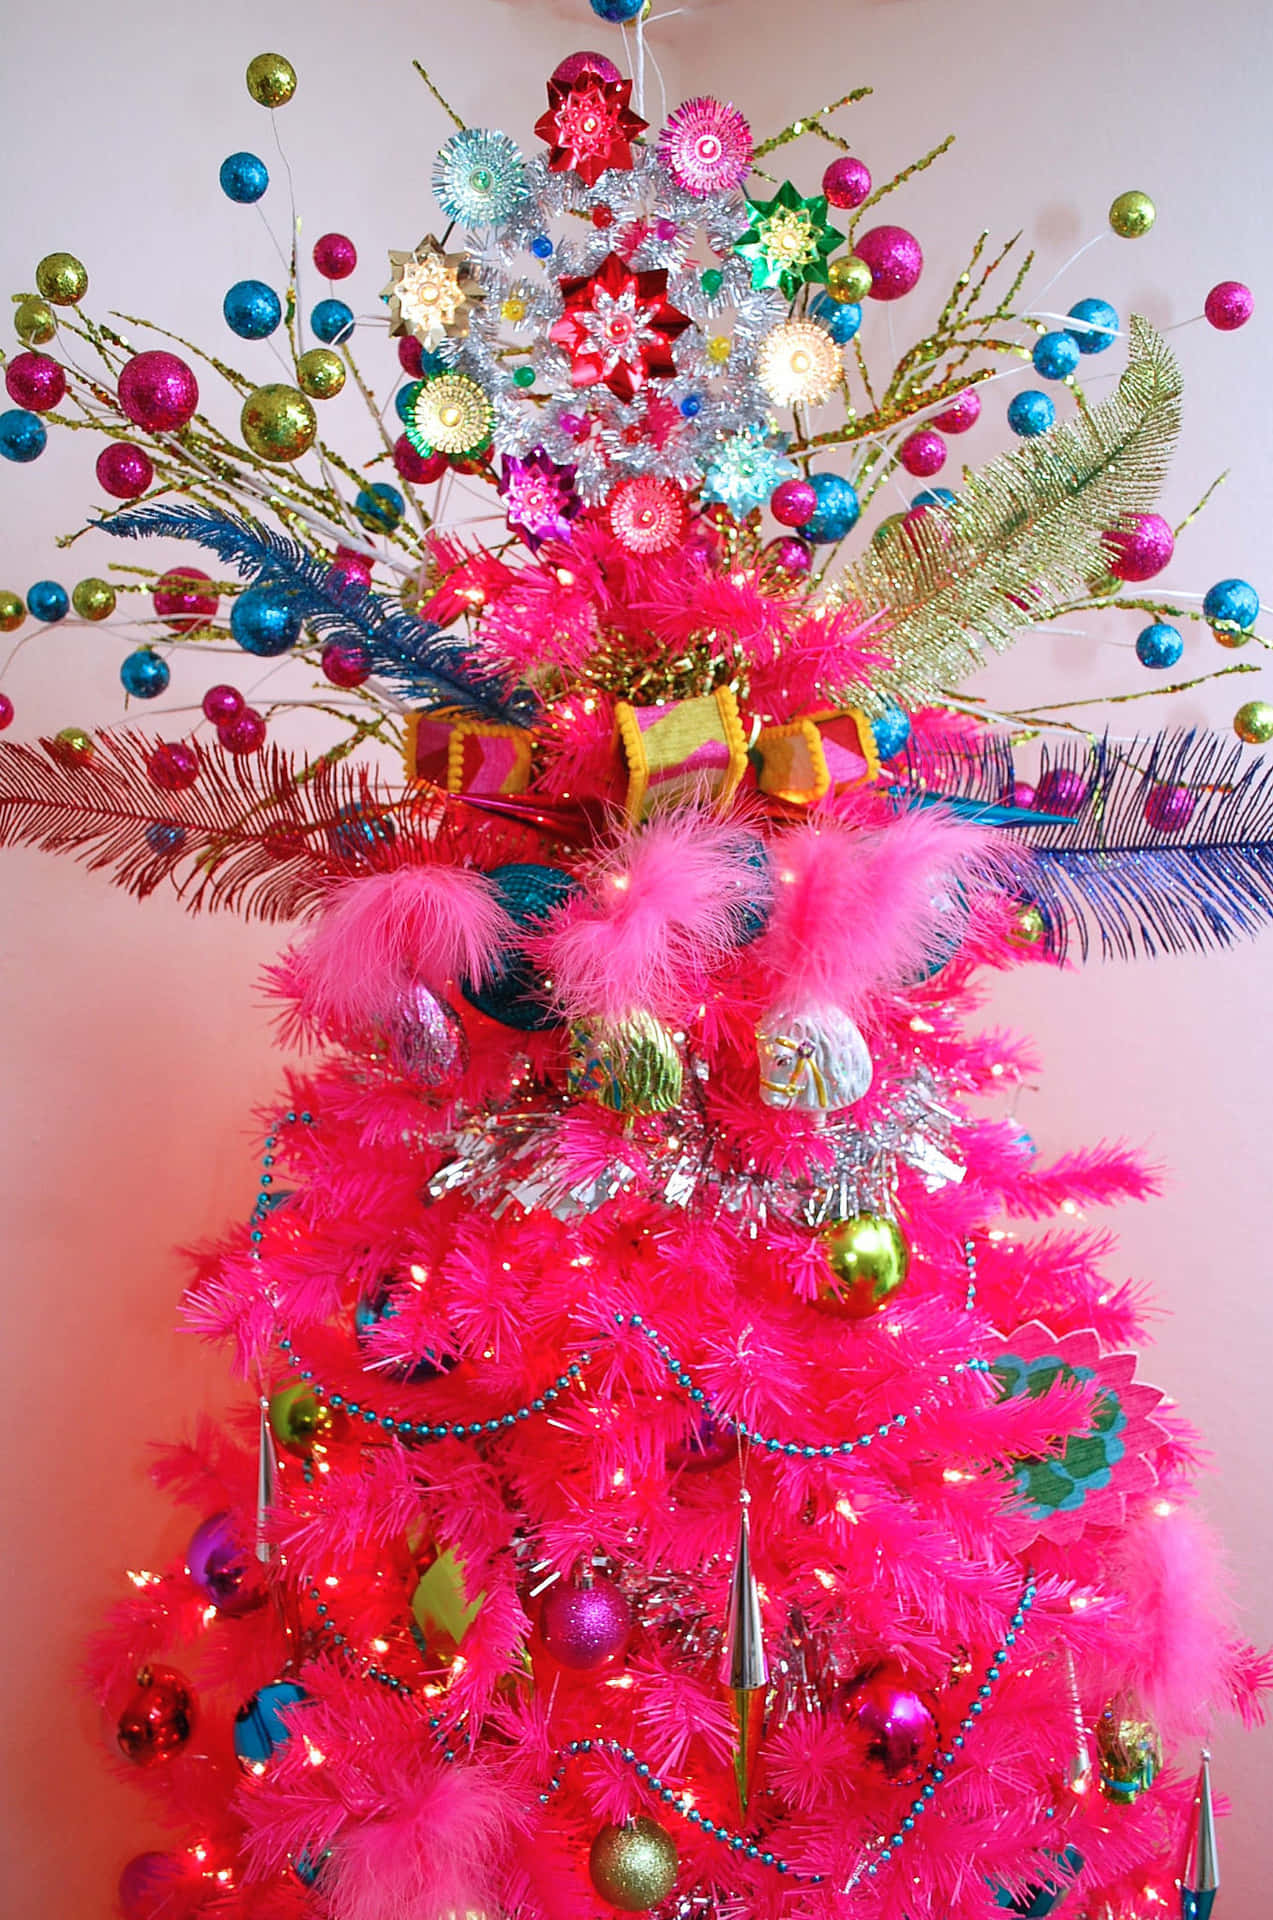 A cheerful pink Christmas tree perfect for the holiday season Wallpaper